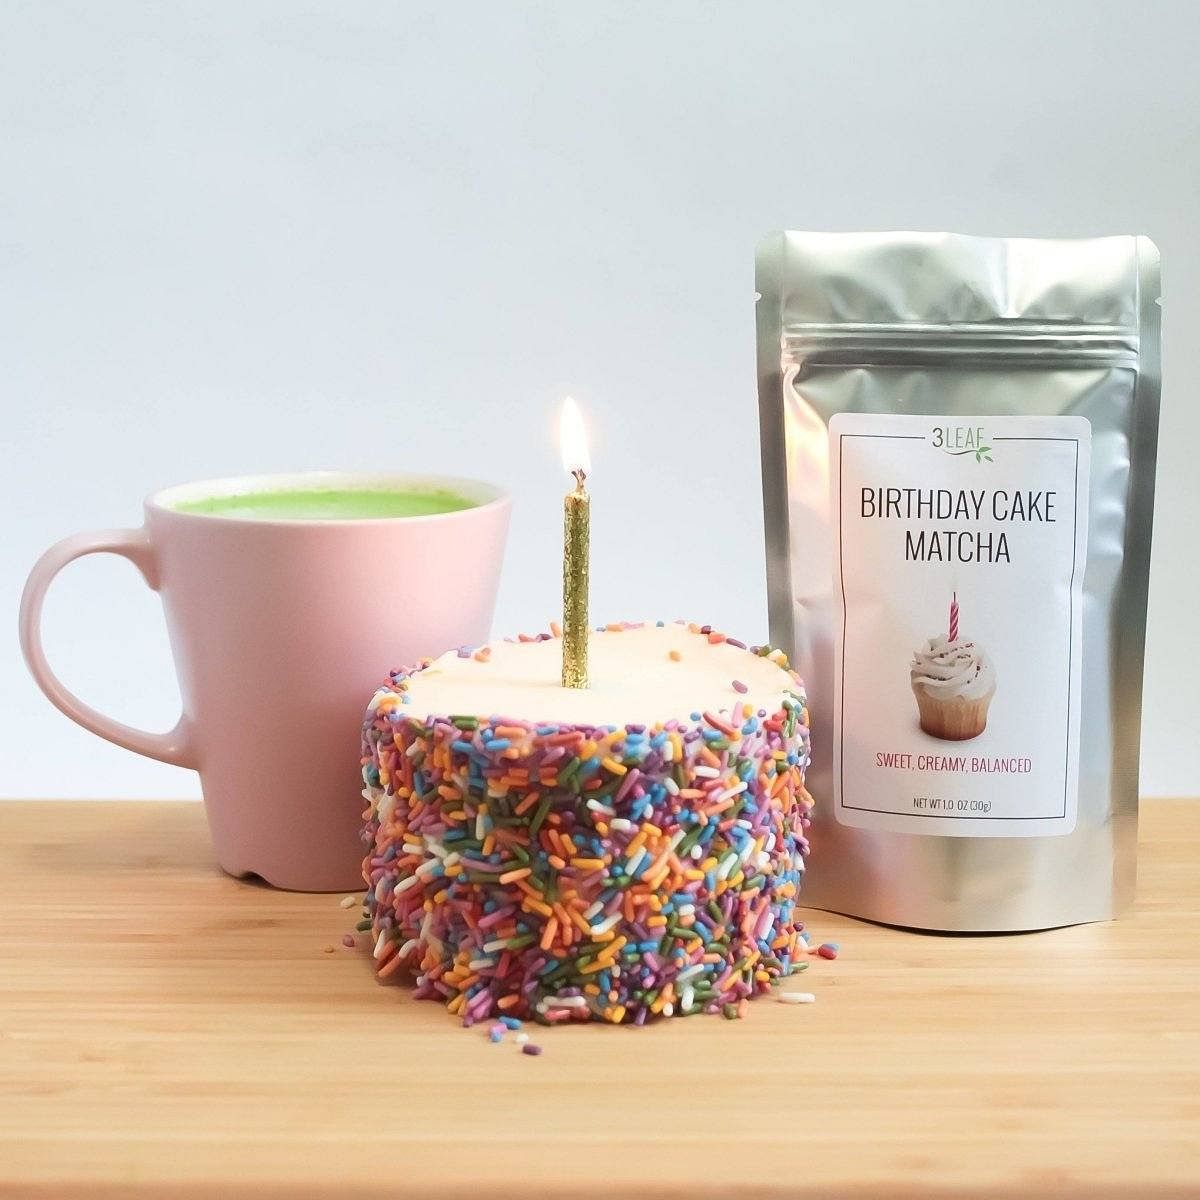 Birthday Cake Matcha With Birthday Cake Covered in Sprinkles